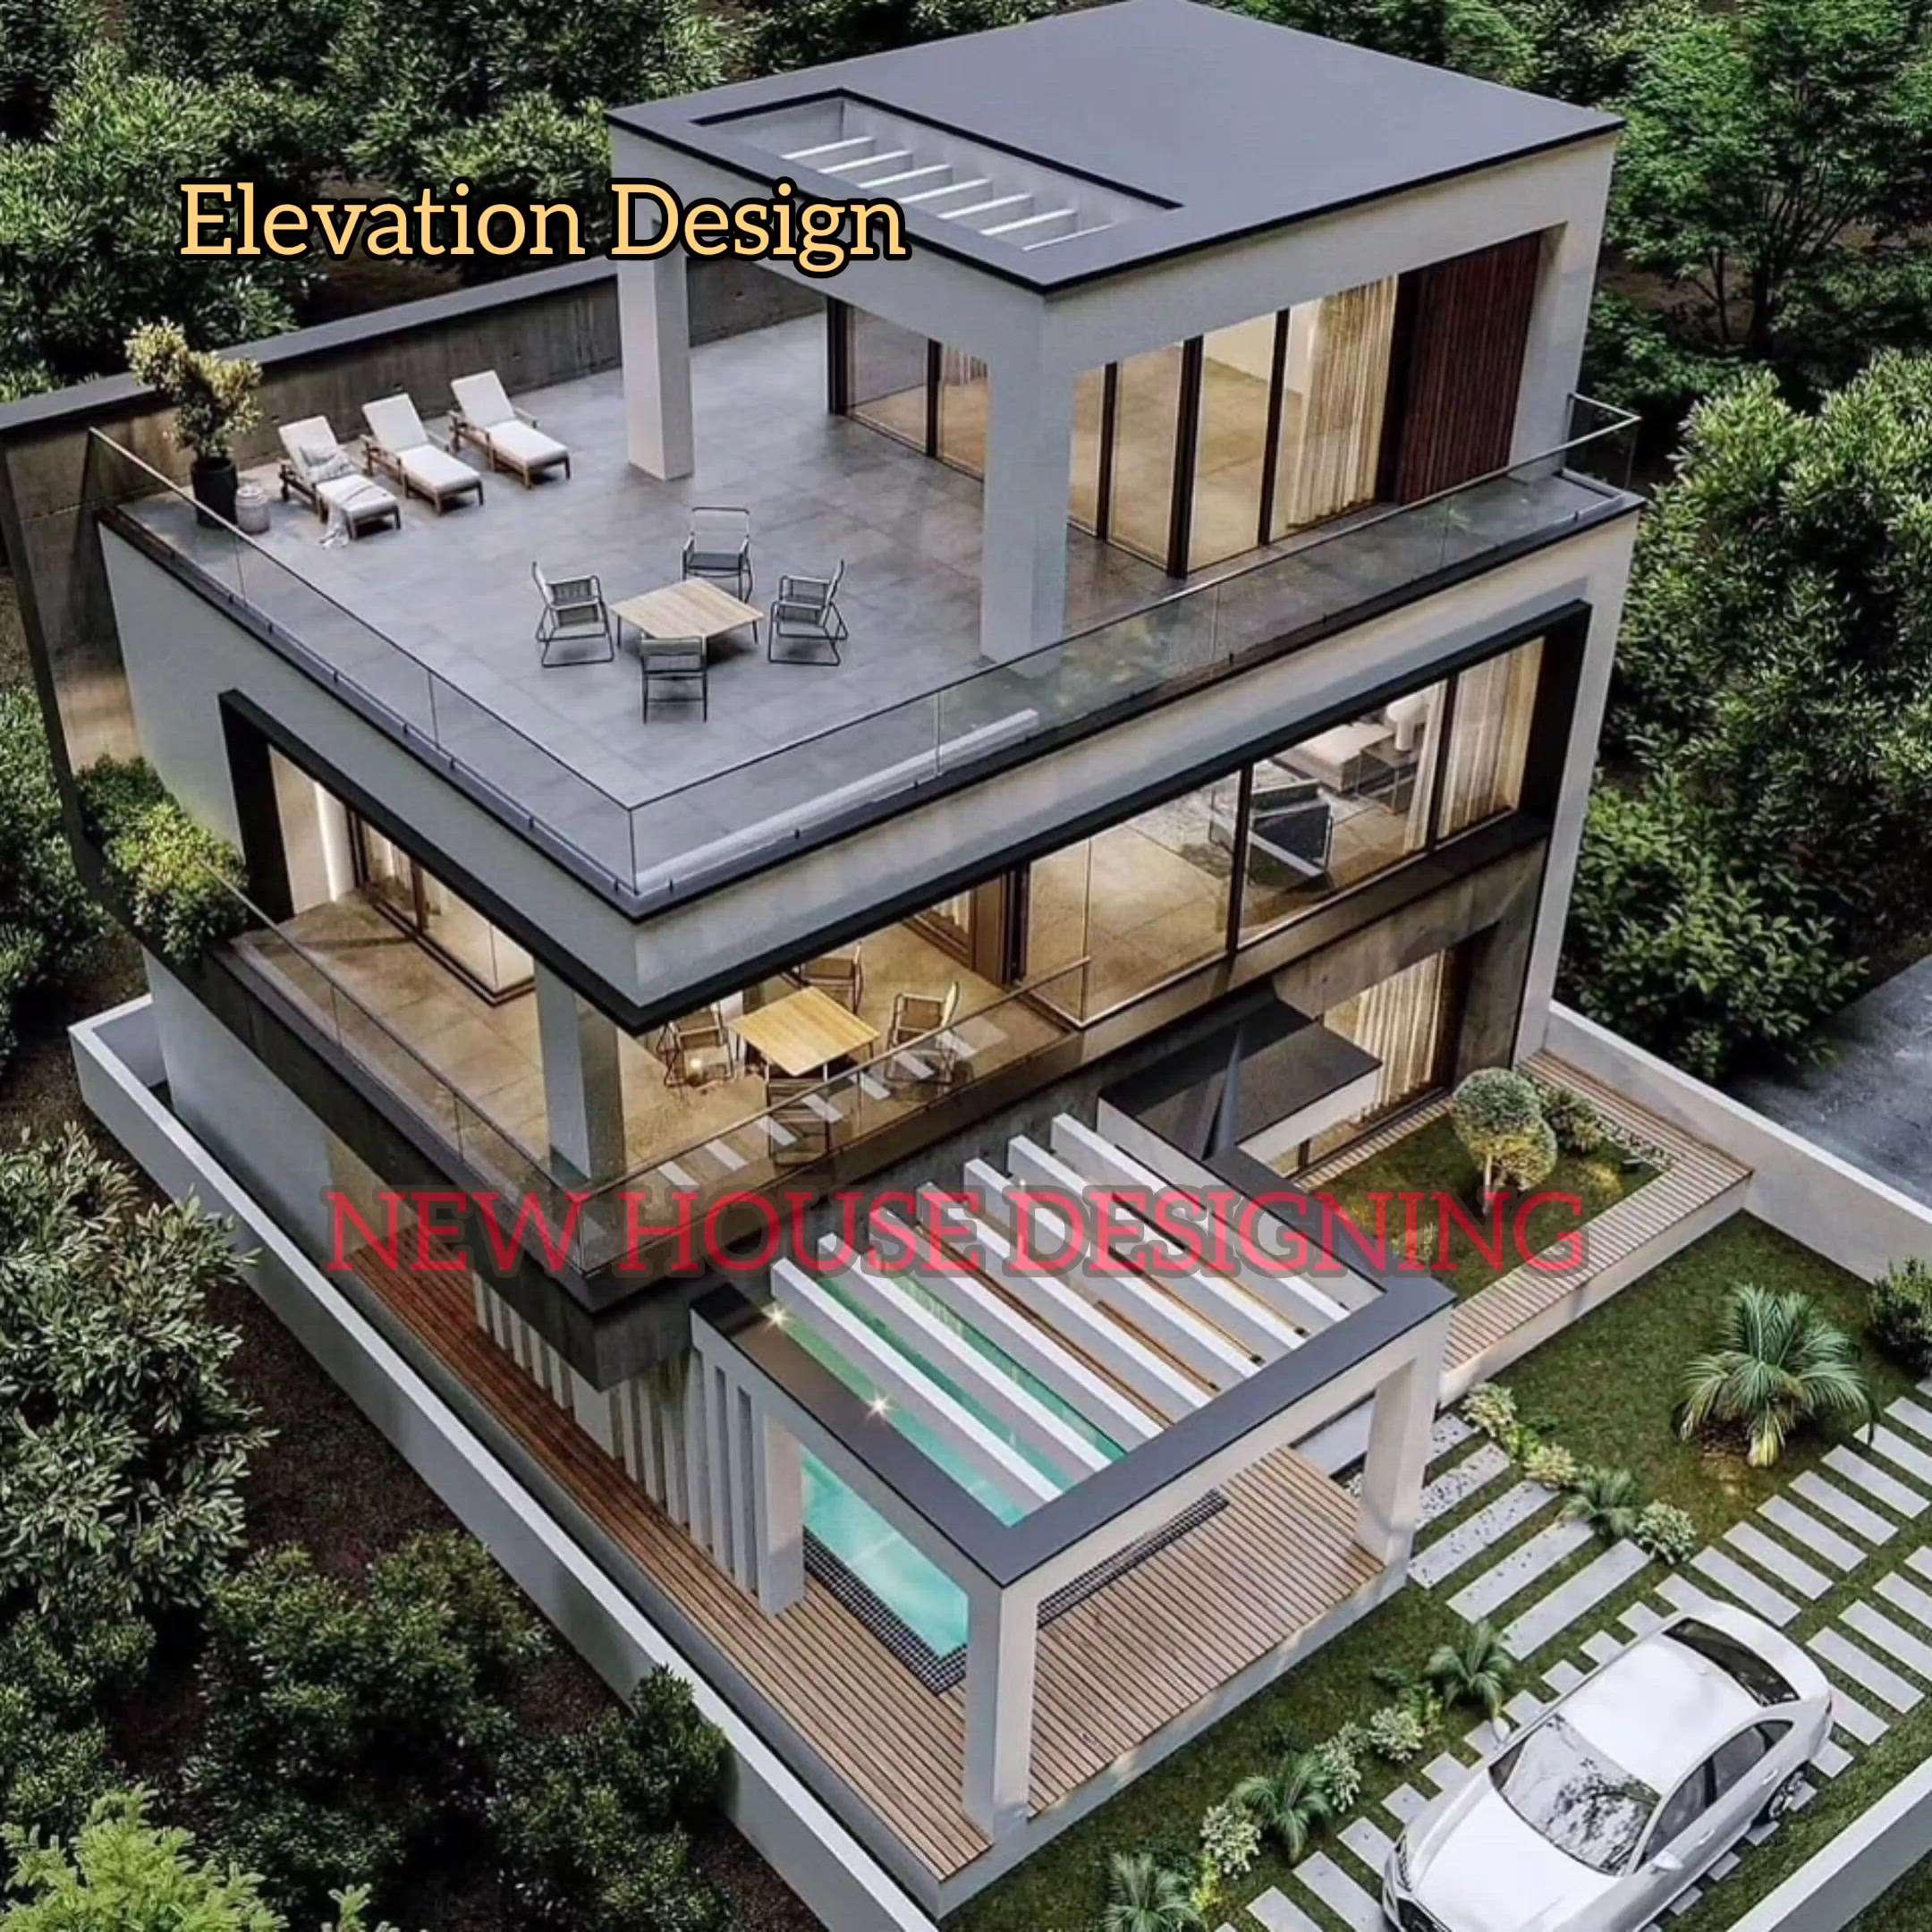 New House Designing🥰. Call Me 7340472883


#elevation #architecture #design #interiordesign #construction #elevationdesign #architect #love #interior #d #exteriordesign #motivation #art #architecturedesign #civilengineering #u #autocad #growth #interiordesigner #elevations #drawing #frontelevation #architecturelovers #home #facade #revit #vray #homedecor #selflove #instagood

#designer #explore #civil #dsmax #building #exterior #delevation #inspiration #civilengineer #nature #staircasedesign #explorepage #healing #sketchup #rendering #engineering #architecturephotography #archdaily #empowerment #planning #artist #meditation #decor #housedesign #render #house #lifestyle #life #mountains #buildingelevation